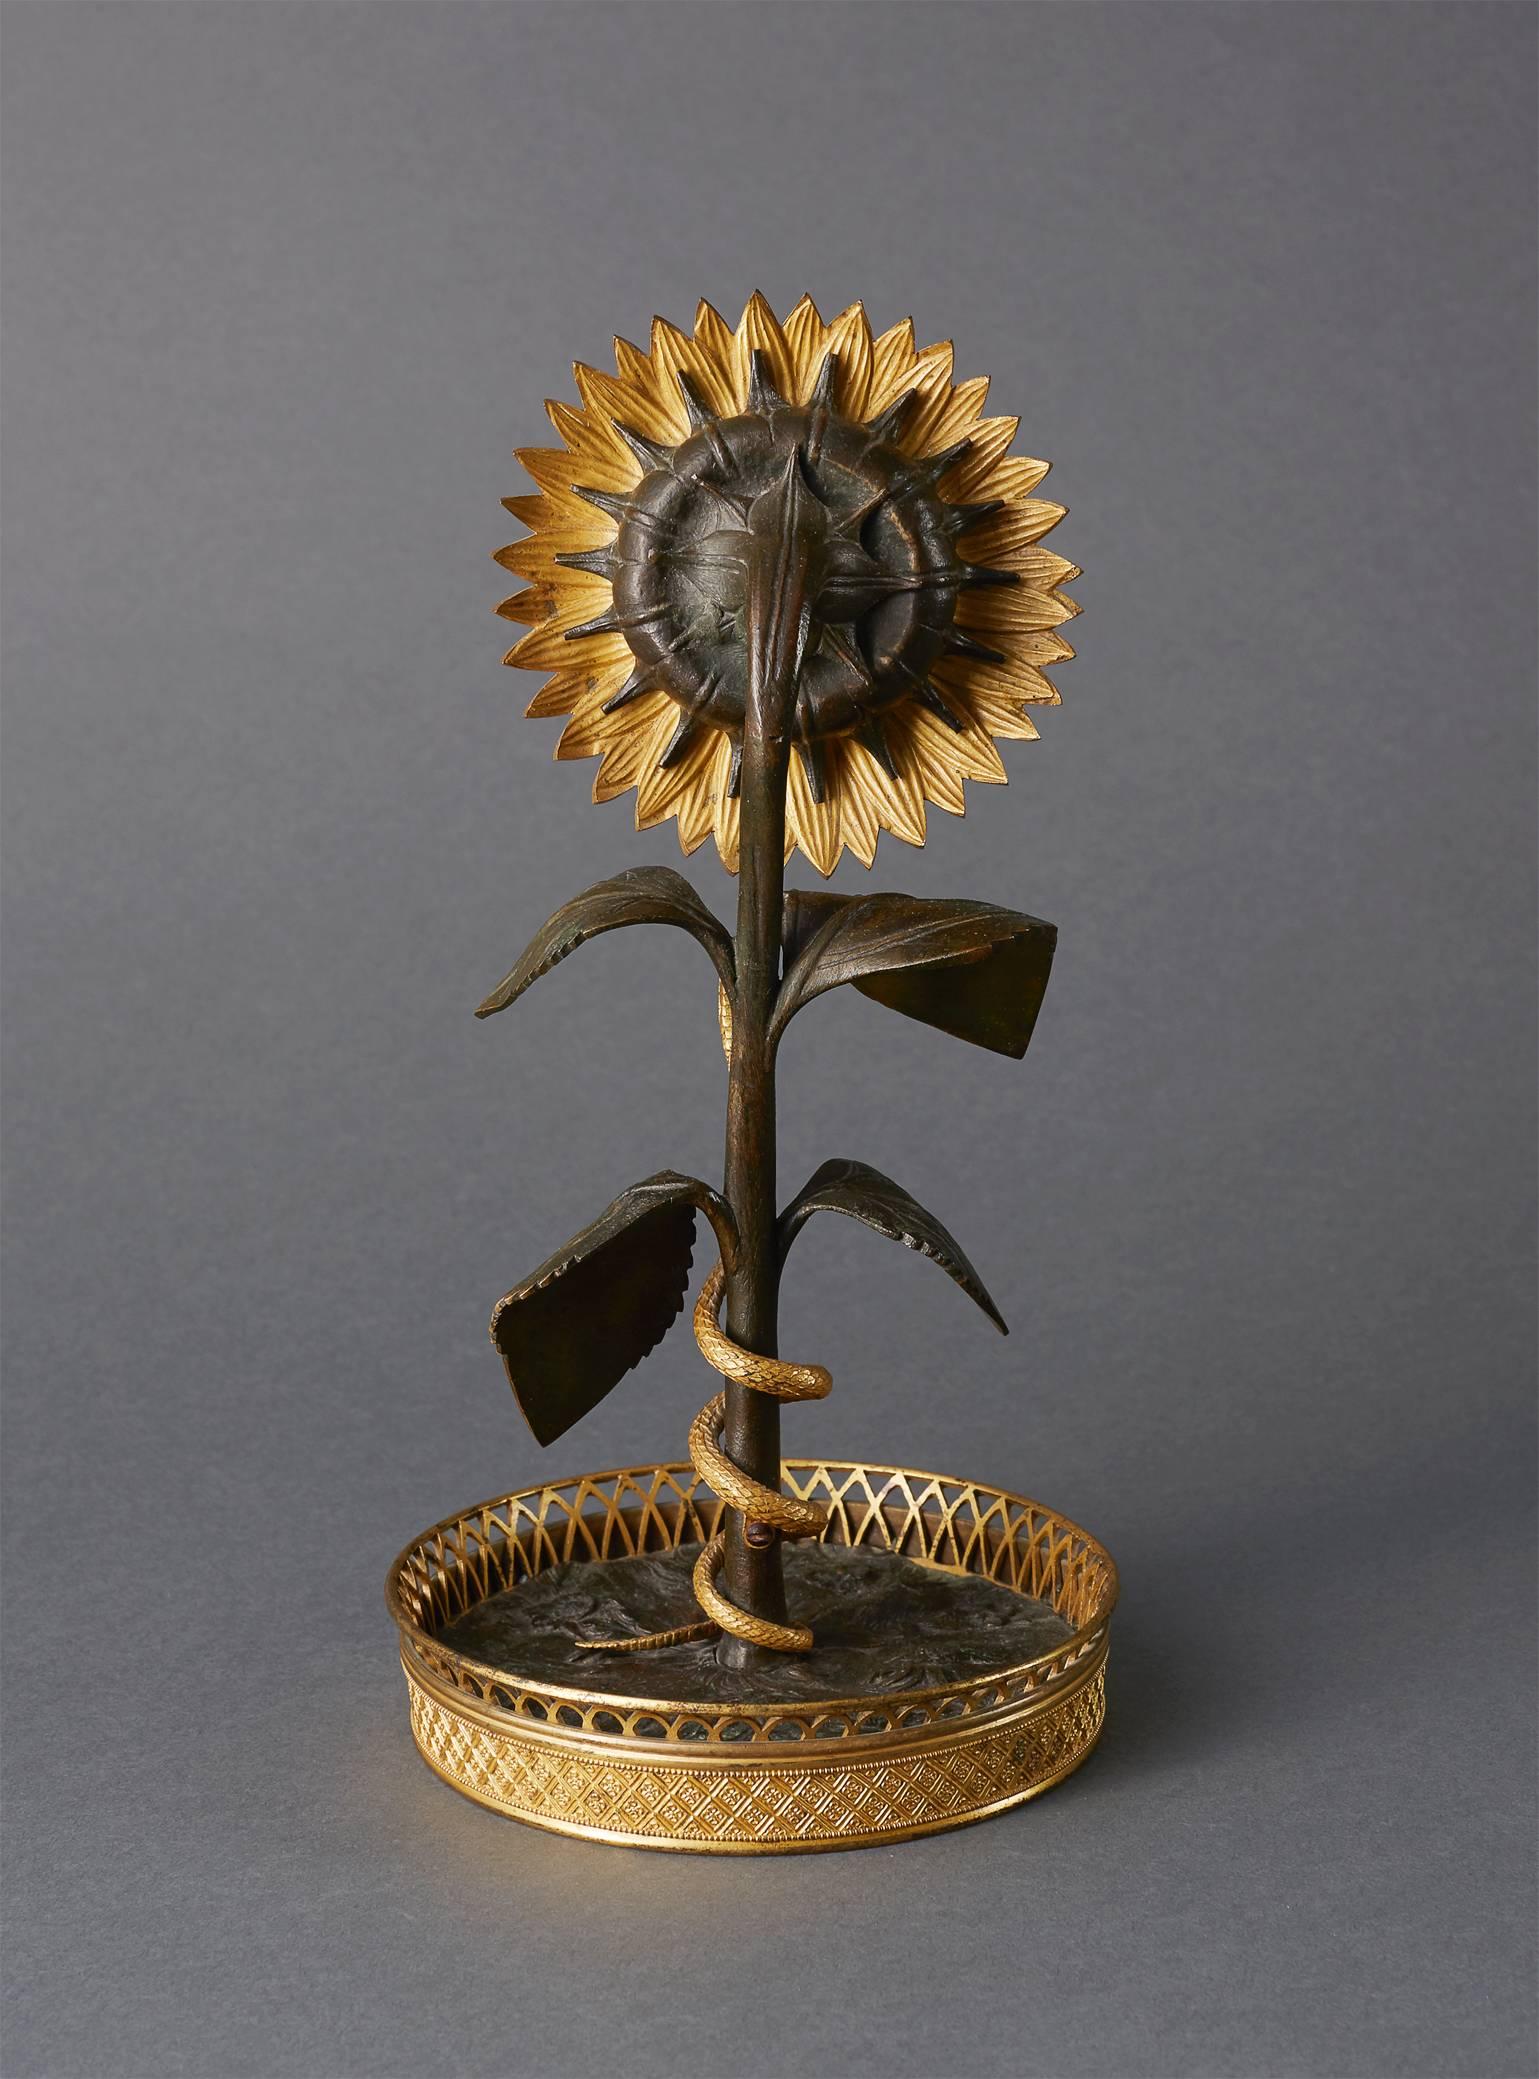 A very unusal and amusing clock from the early 19th century. Attributed to the esteemed bronzier Louis-Isidore Choiselat (1784-1853) known as Choiselat-Gallien. The naturalistically cast sunflower with a detachable bezel inset with a fine watch